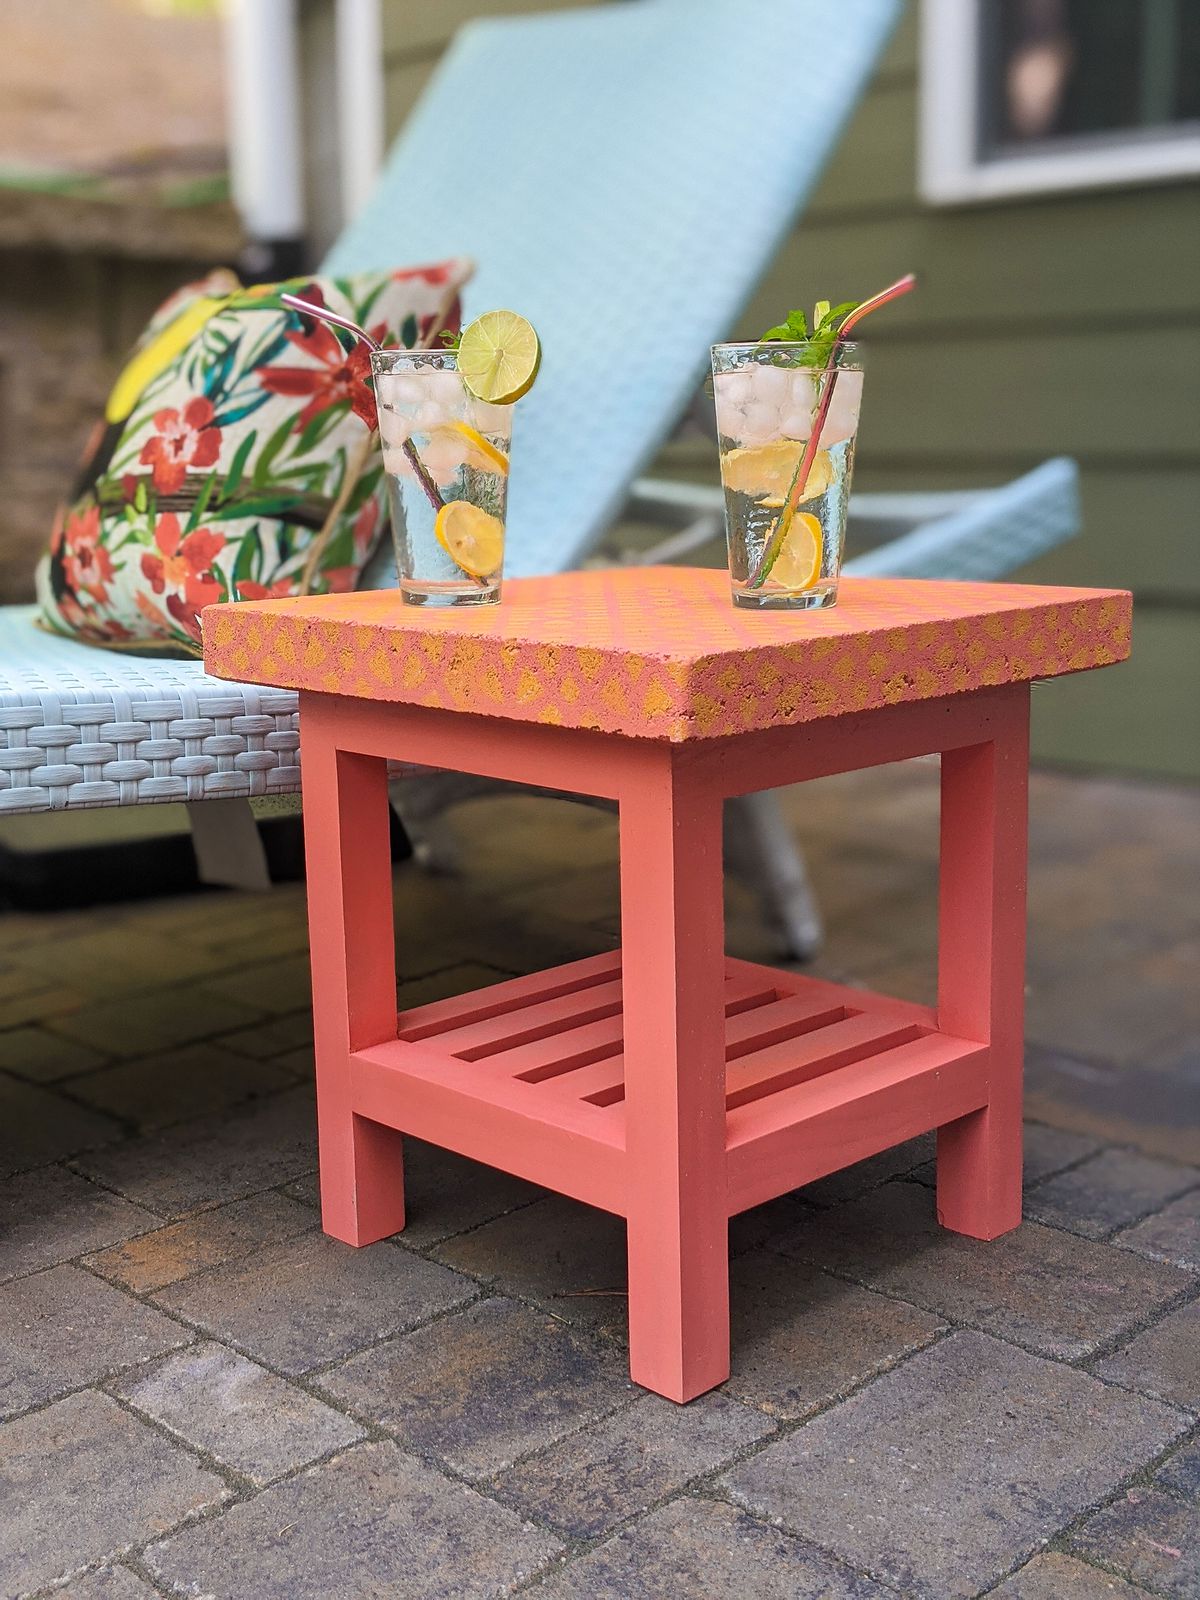 A coral colored side table with a patterned patio paver on top. 